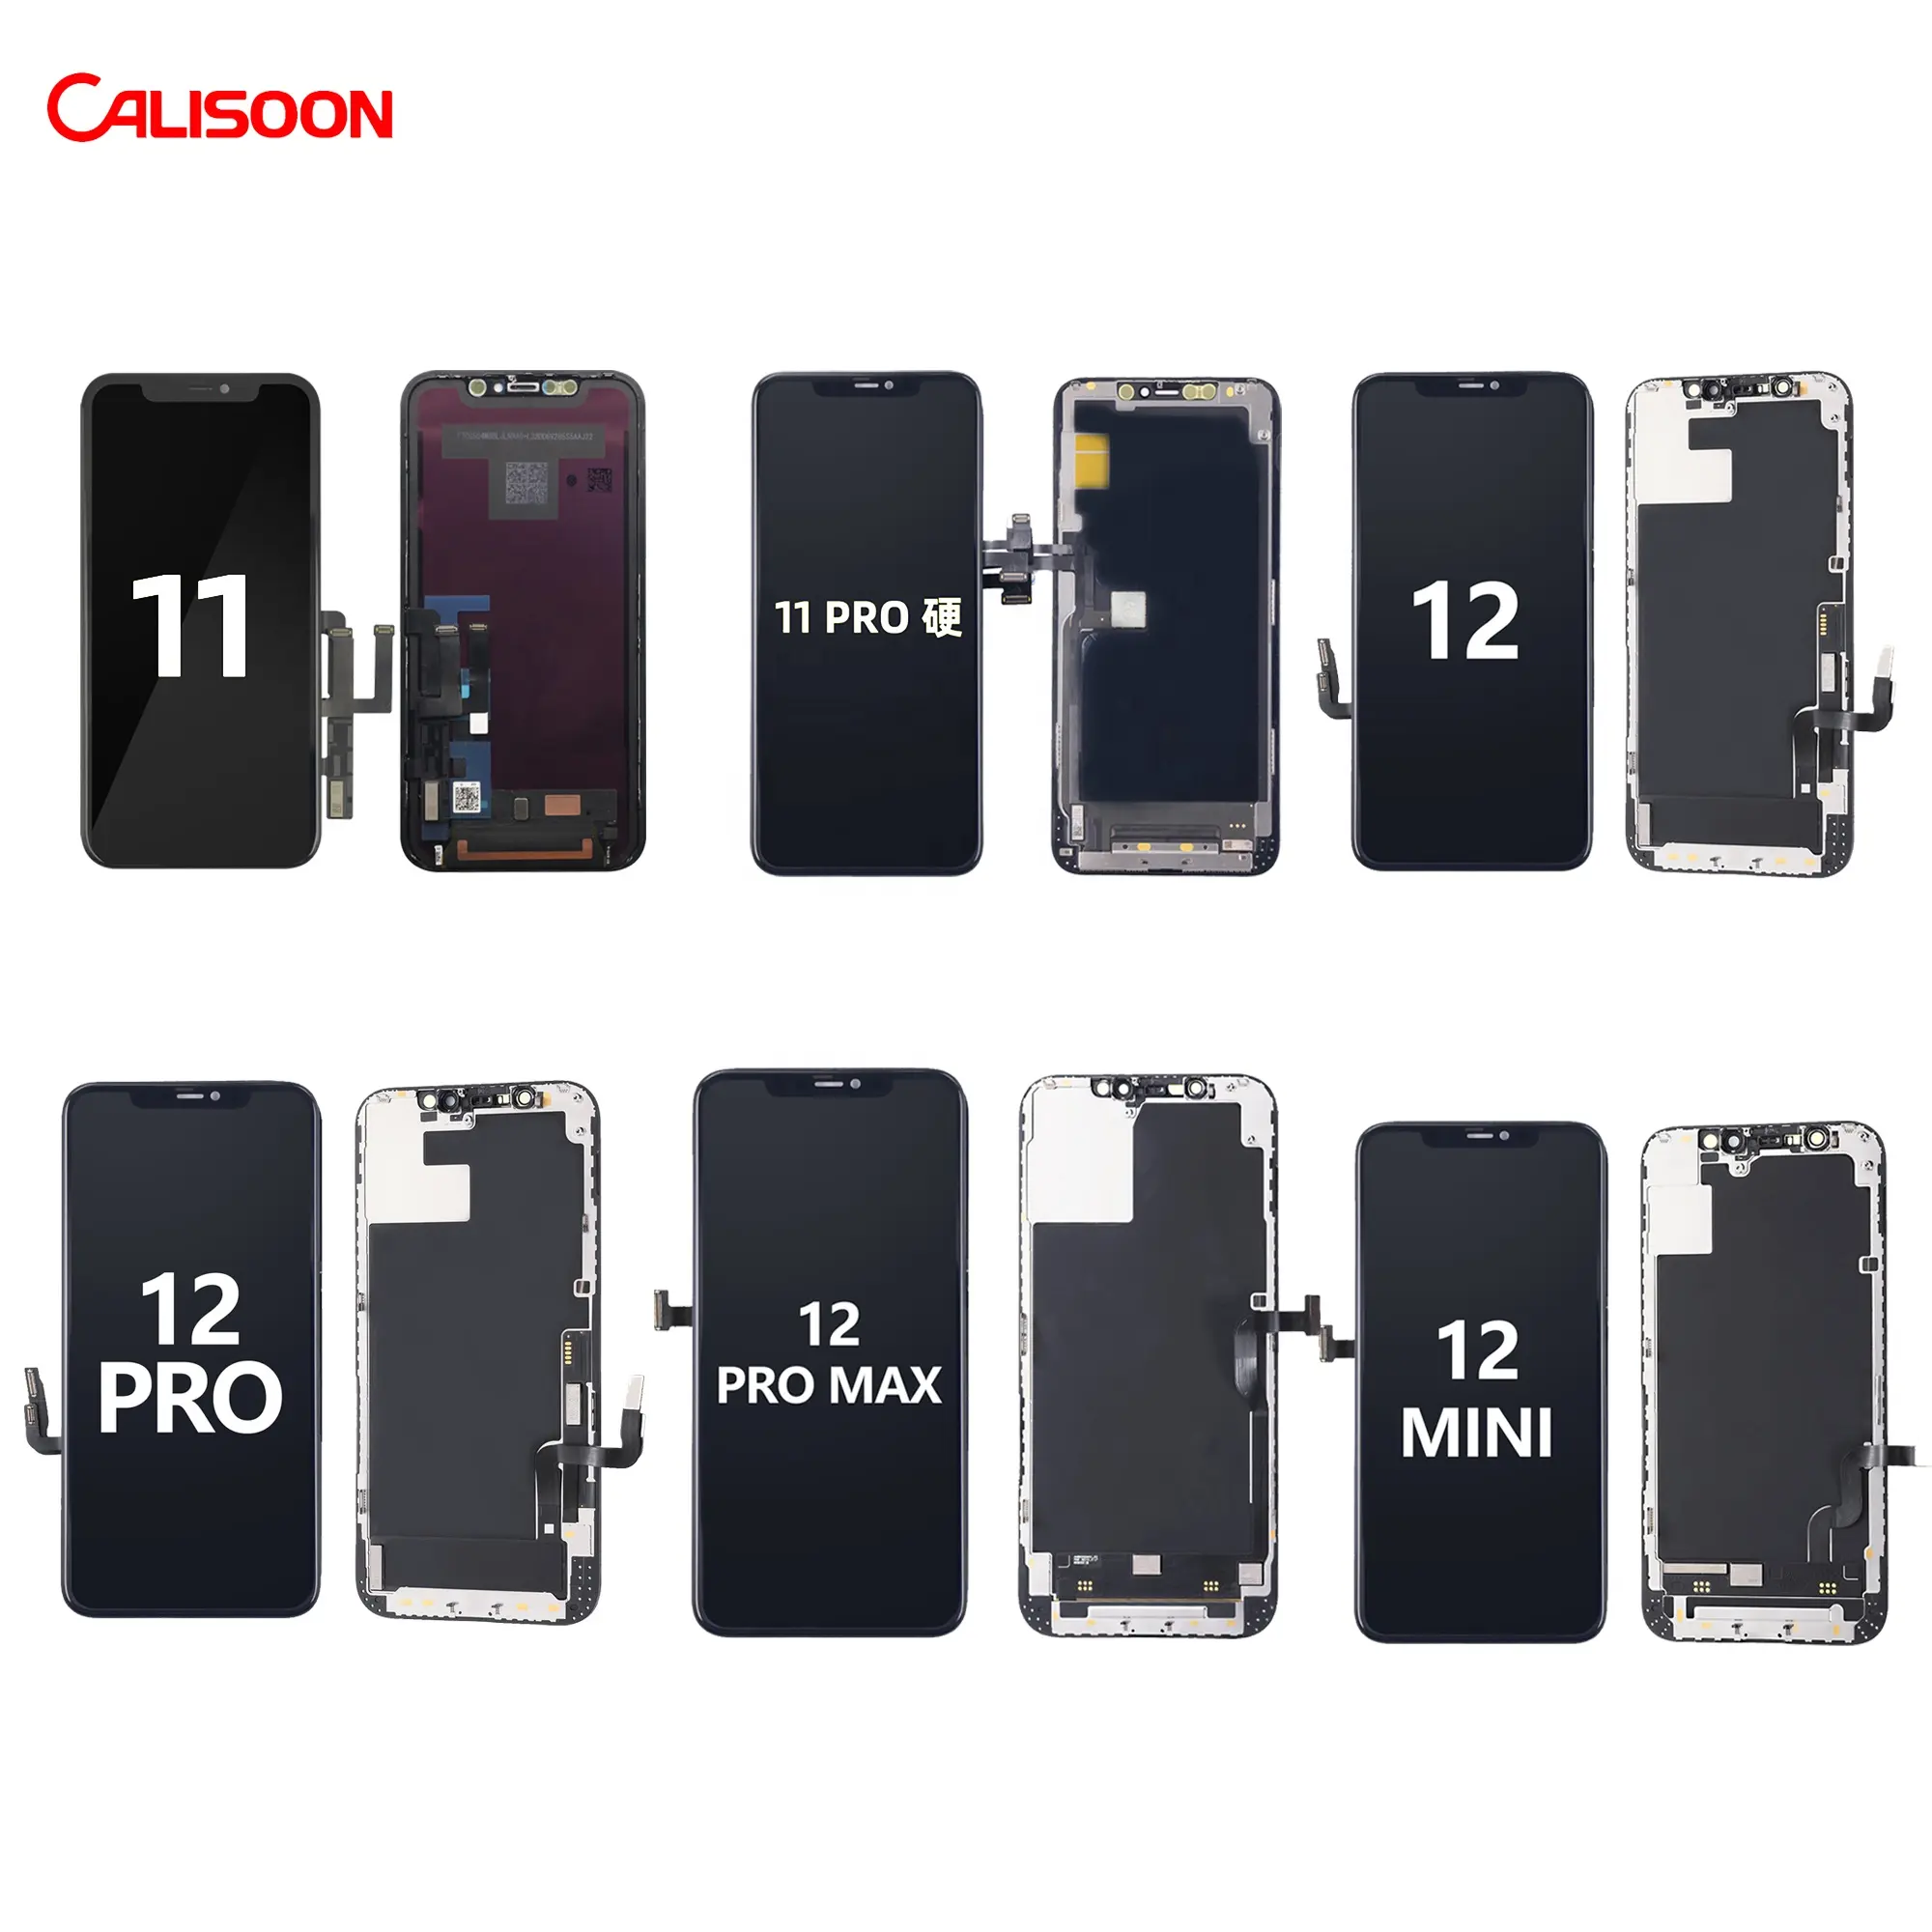 CALISOON หน้าจอ LCD สำหรับ IPhone,จอ LCD สำหรับ IPhone XR XS X 11 12 13 PRO MAX 8 7 6 Plus